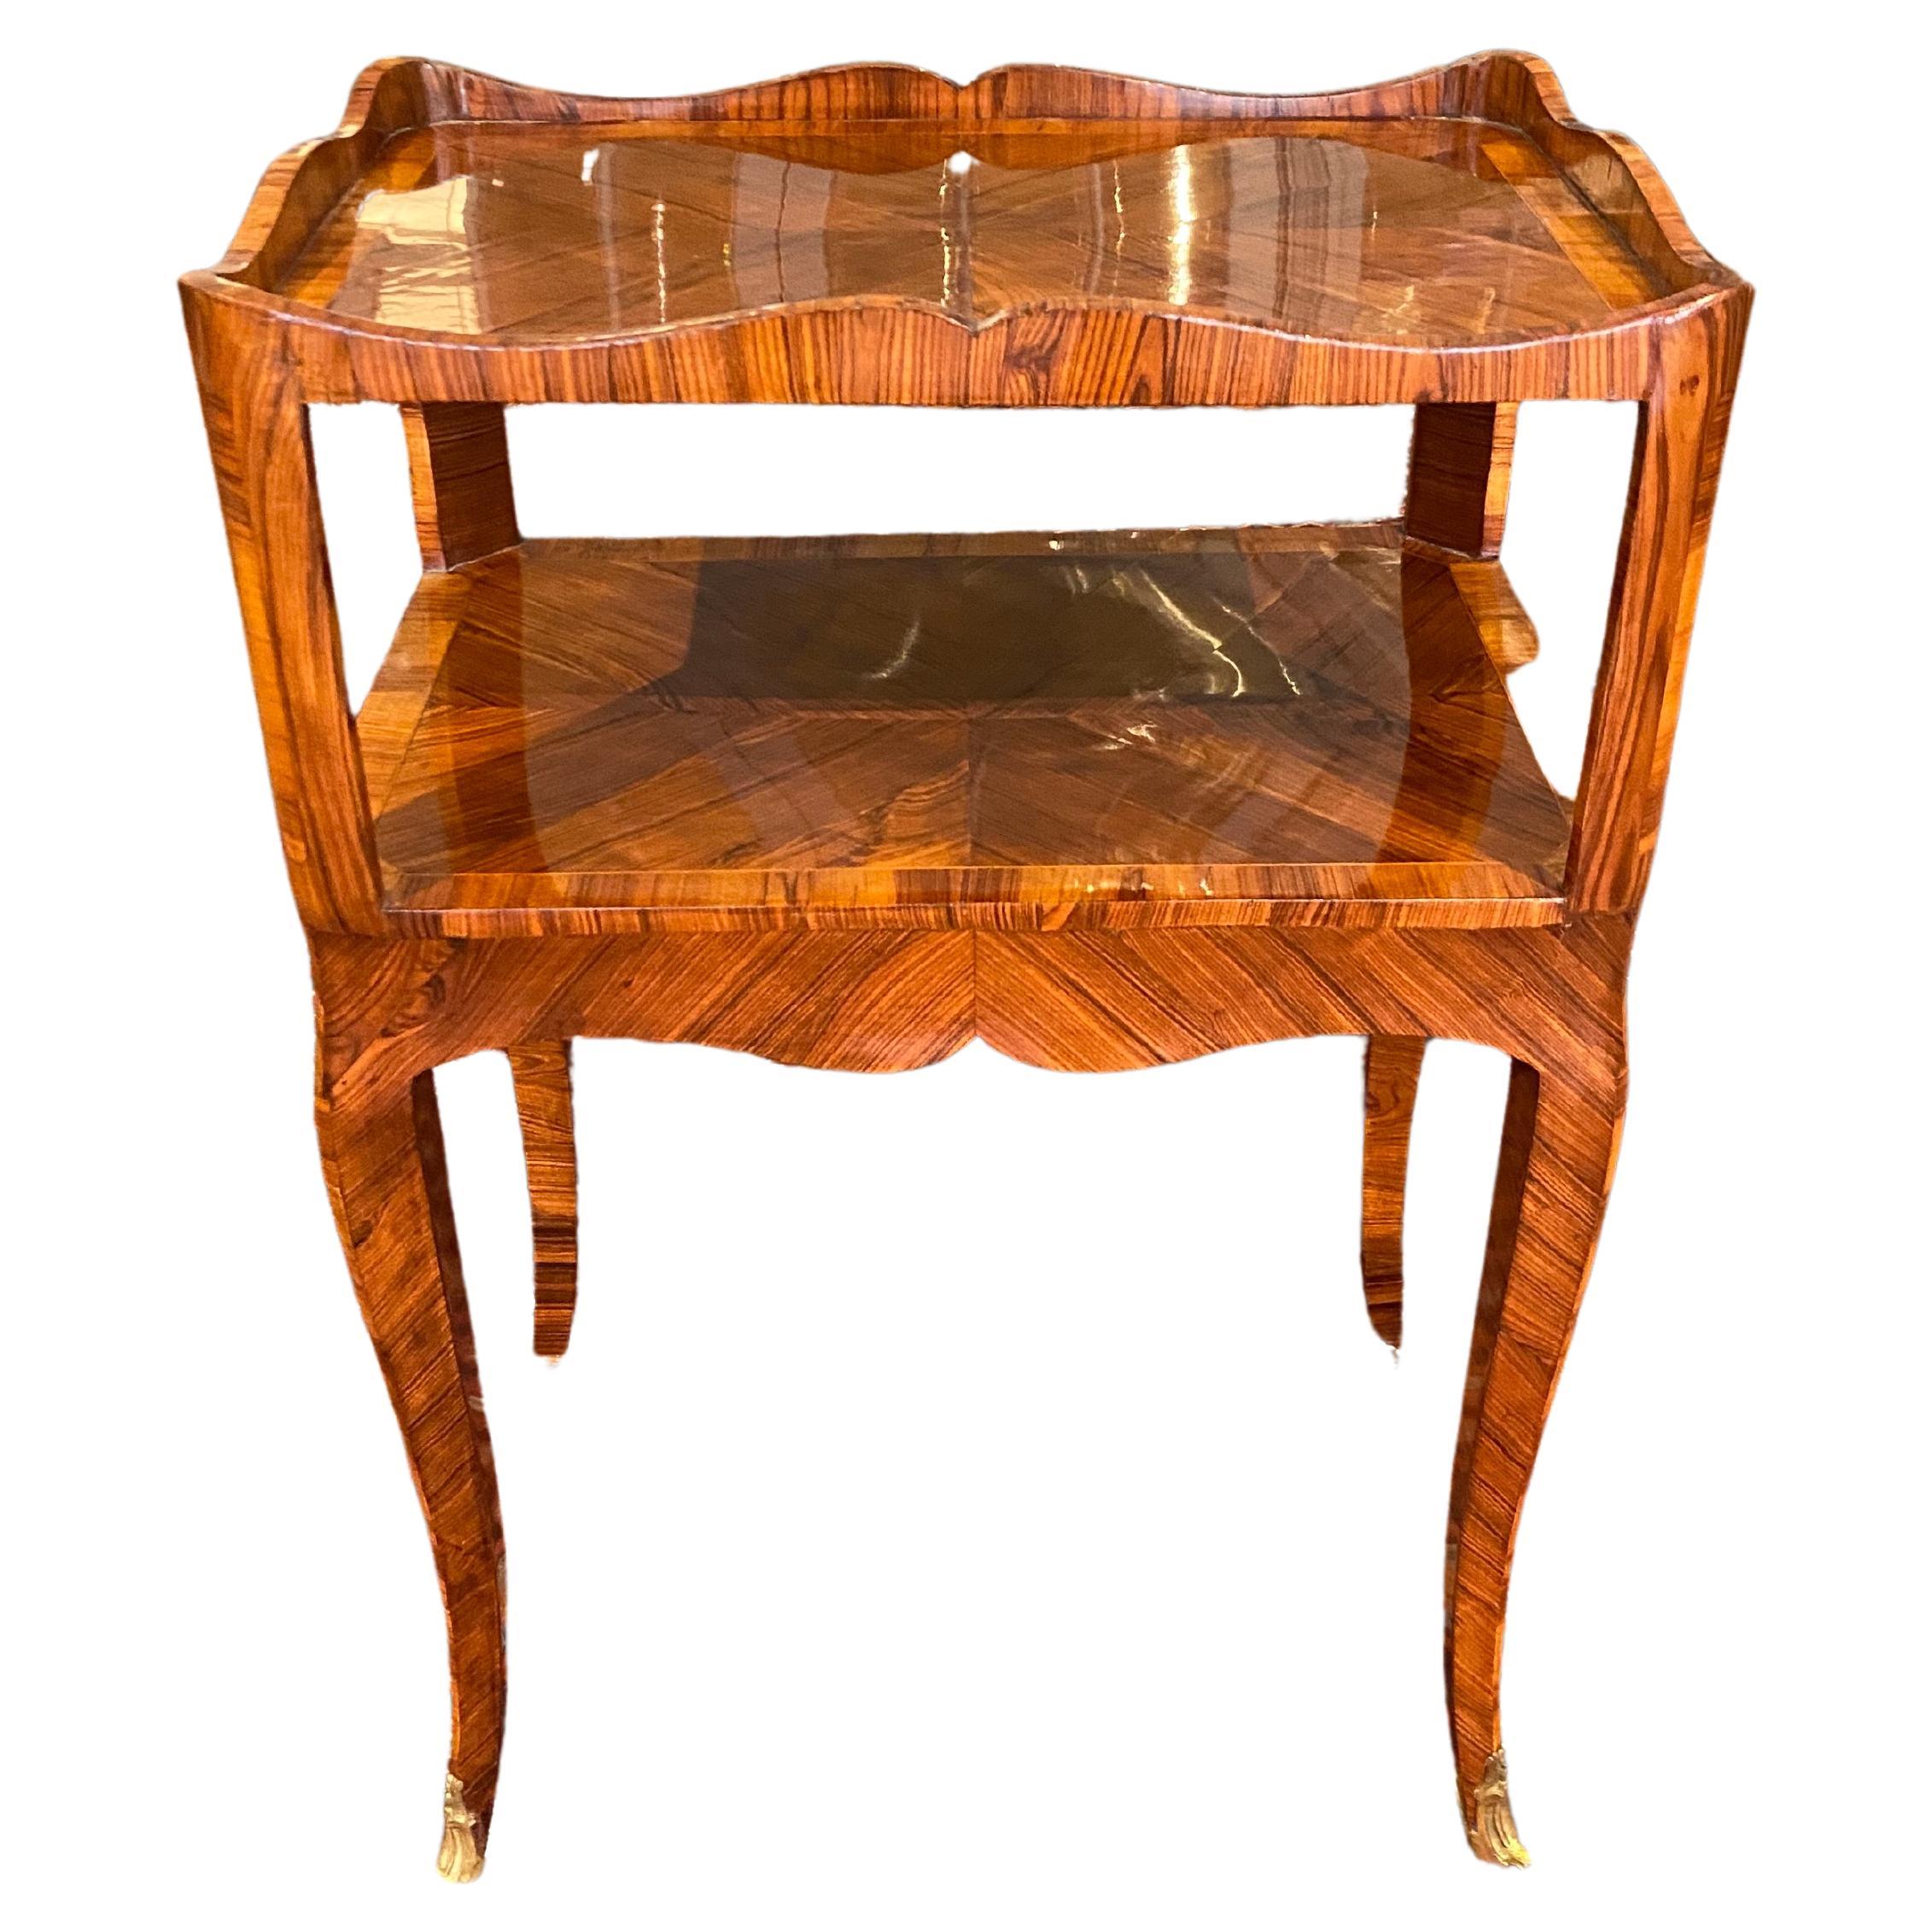 Louis XV Ormolu-Mounted Kingwood Bedside Table, 'Mid 18th Century' For Sale